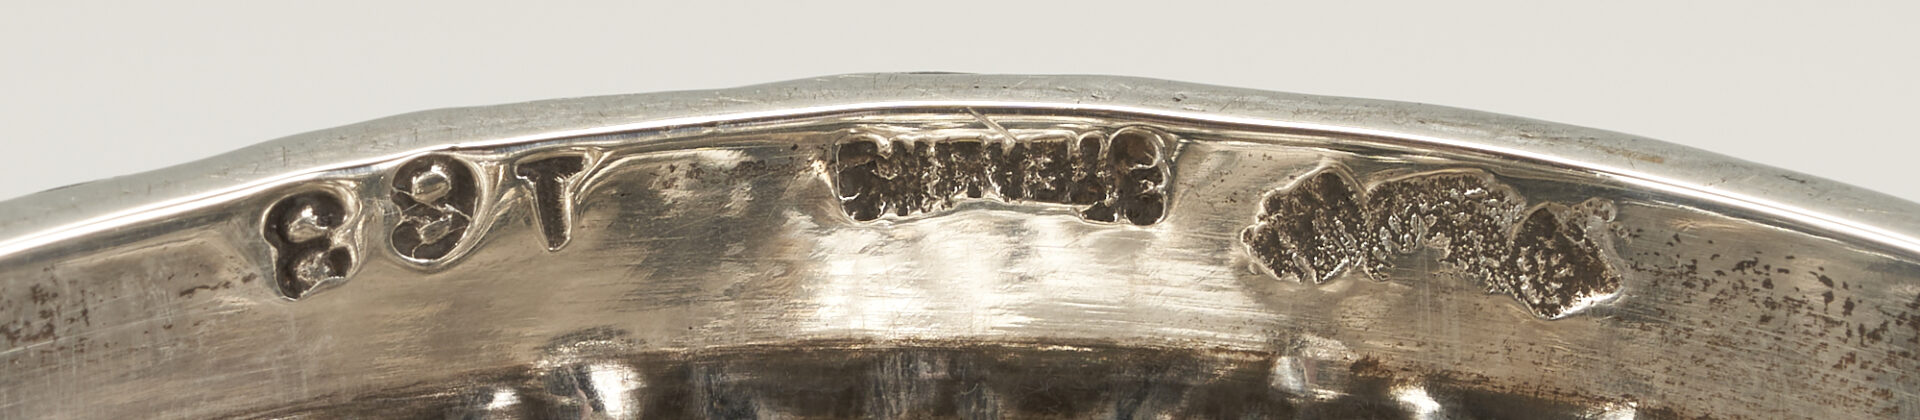 Lot 935: 2 Sterling Silver Repousse Water Goblets by Baltimore Silversmiths Mfg. Co.